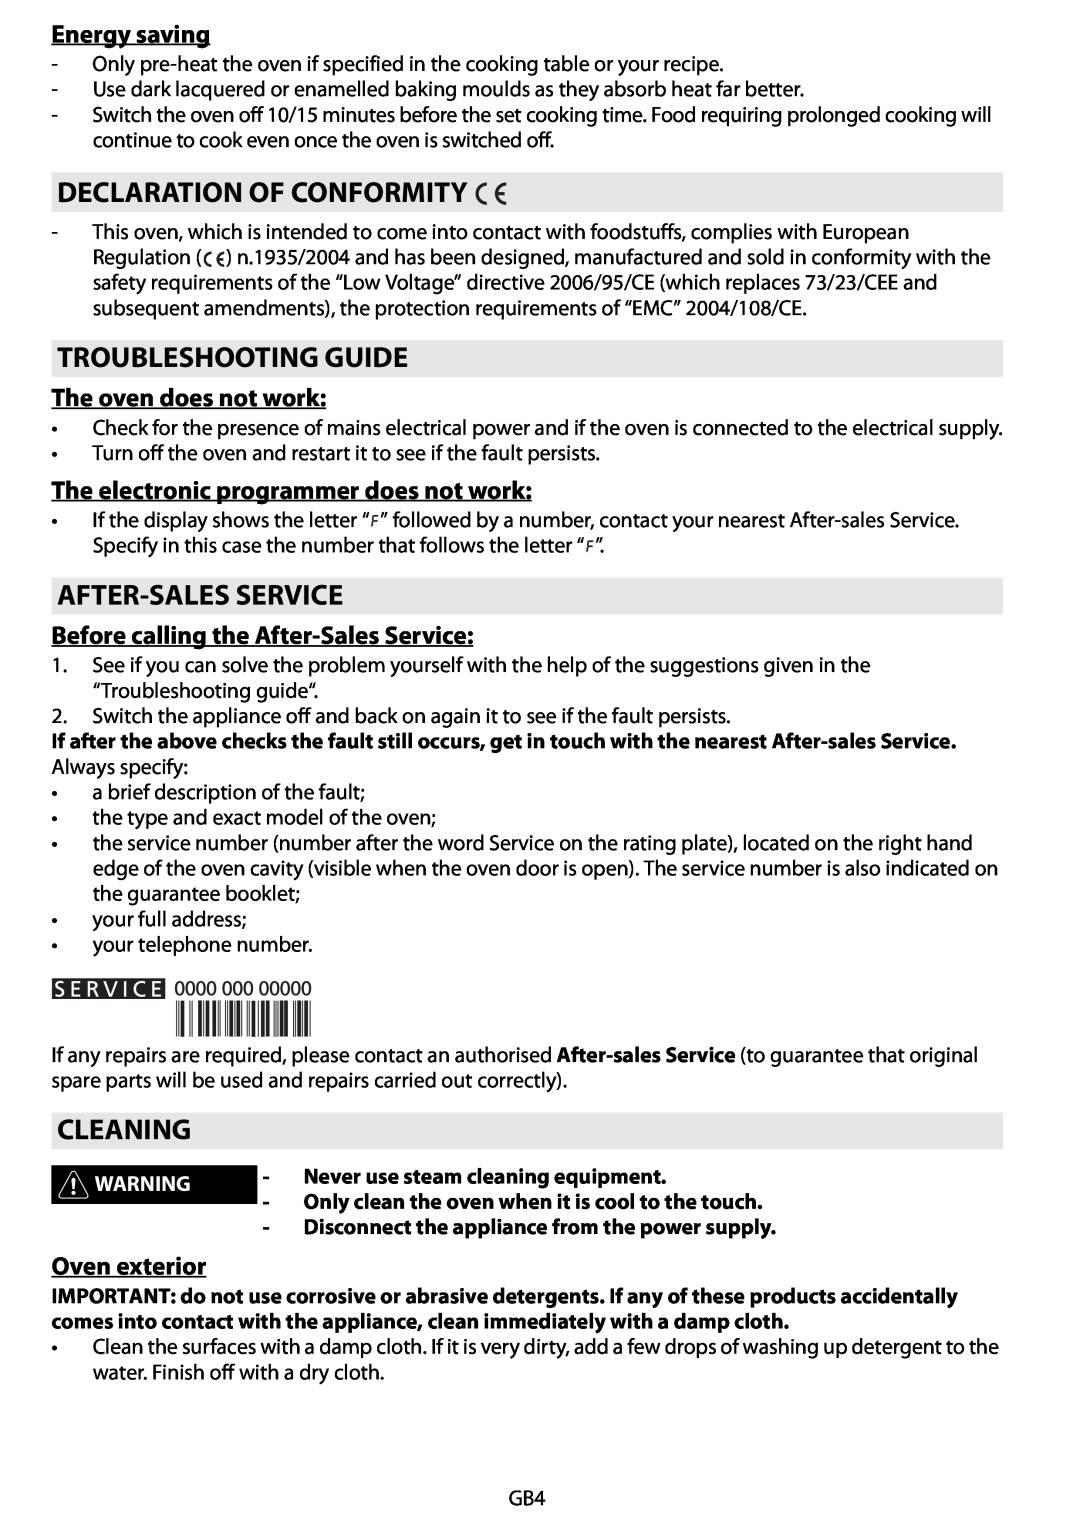 Whirlpool AKZM 788 manual Declaration Of Conformity, Troubleshooting Guide, After-Sales Service, Cleaning, Energy saving 